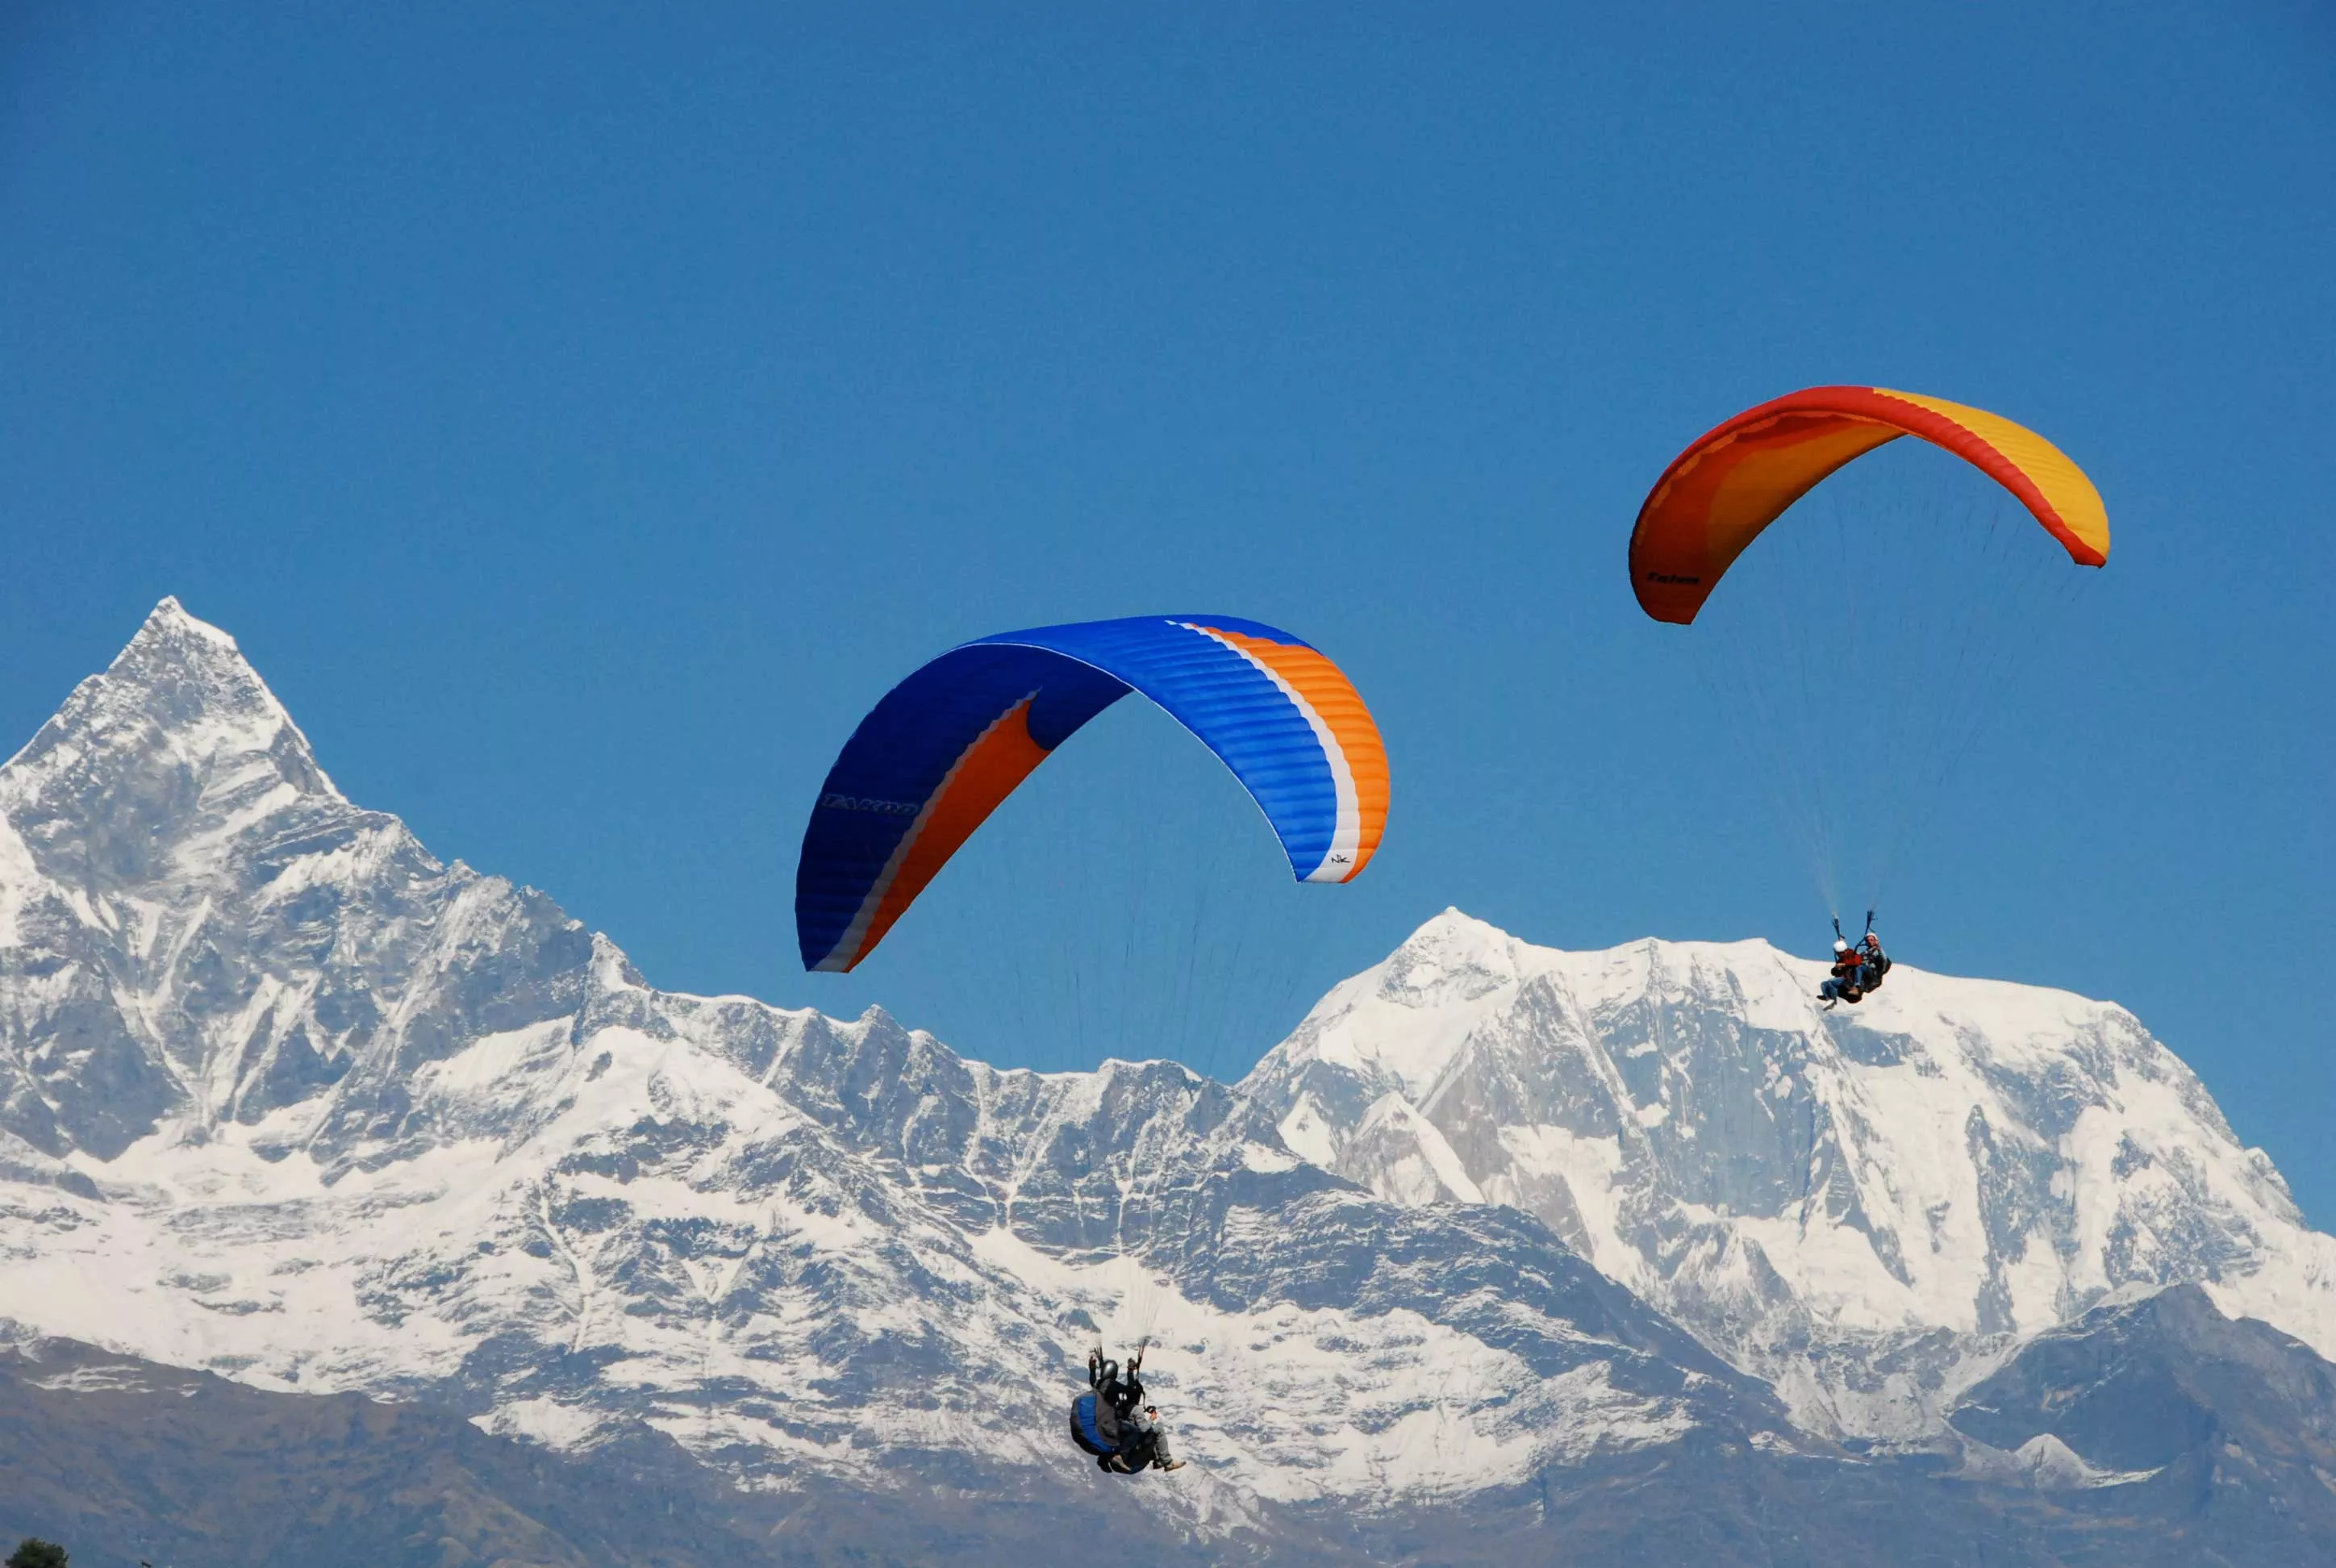 Sikkim Paragliding in India, Central Asia | Paragliding - Rated 5.6